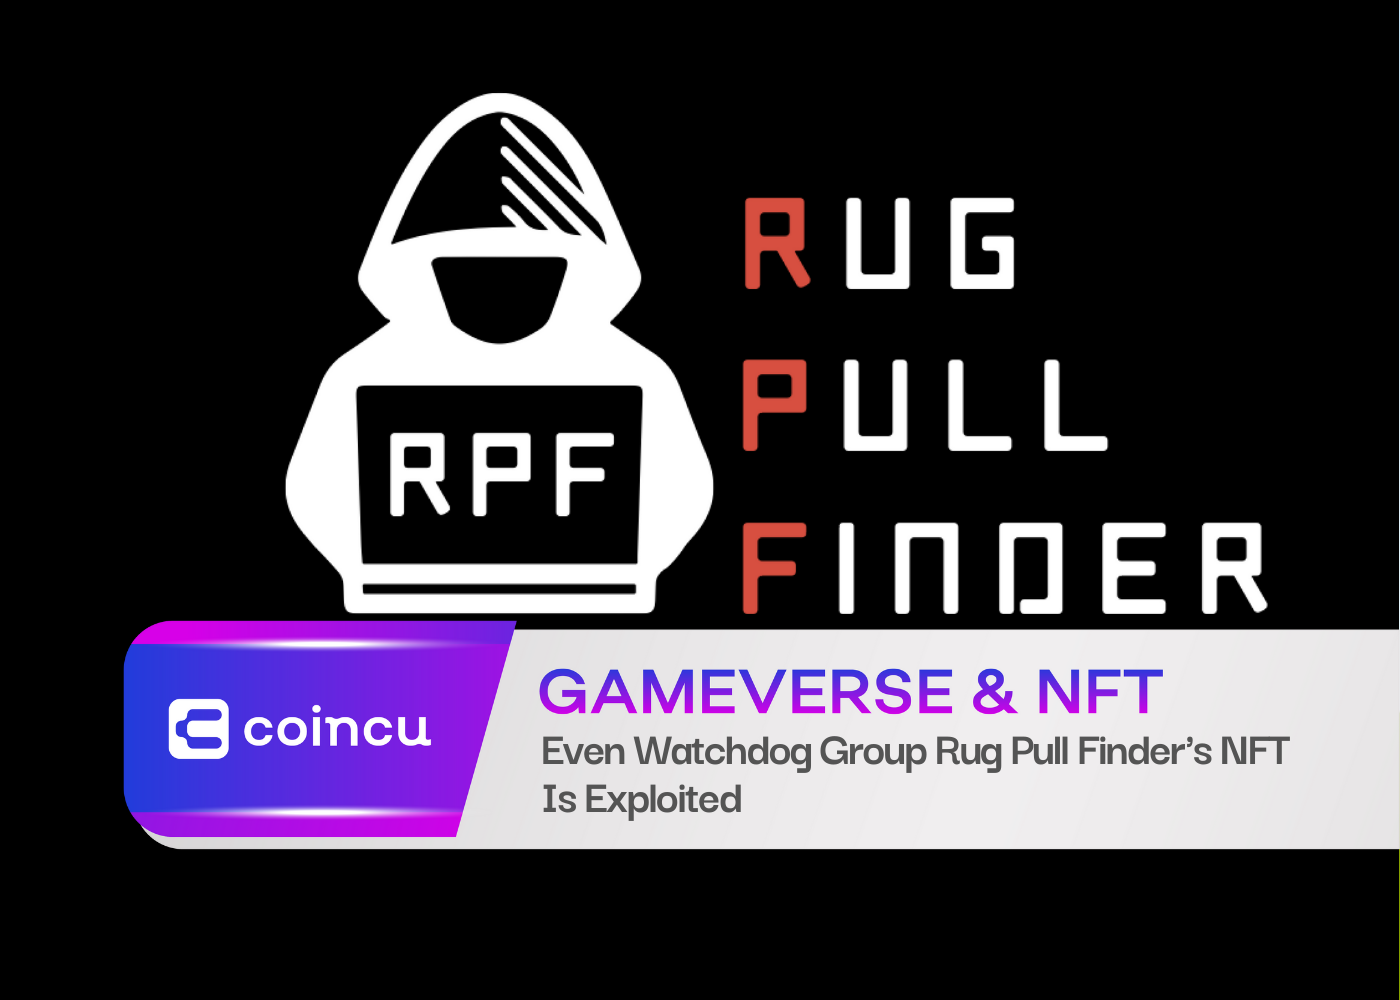 Even Watchdog Group Rug Pull Finder's NFT Is Exploited